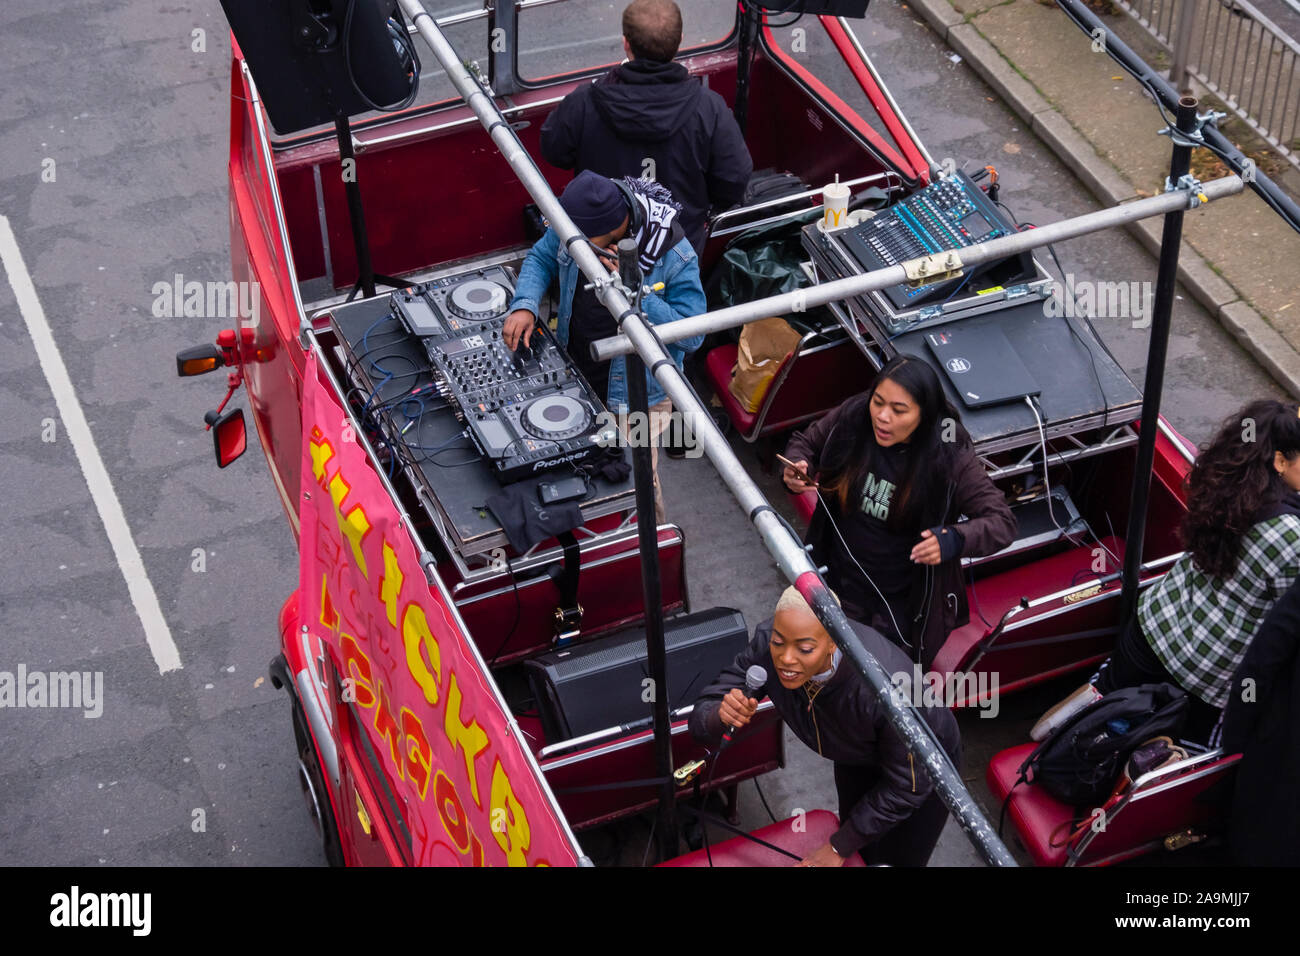 London, UK. 16th November 2019. he sound system on the bus as protesters from FCKBoris in orange knitted hats walk through Uxbridge  urging everyone to register and vote against Boris Johnson and kick him out for his racist, elitist politics. They marched to Brunel University to persuade students. Johnson had a majority of just over 5 thousand in 2017 and Labour candidate Ali Milani has strong hopes of beating him and the other 10 candidates. Peter Marshall/Alamy Live News Stock Photo